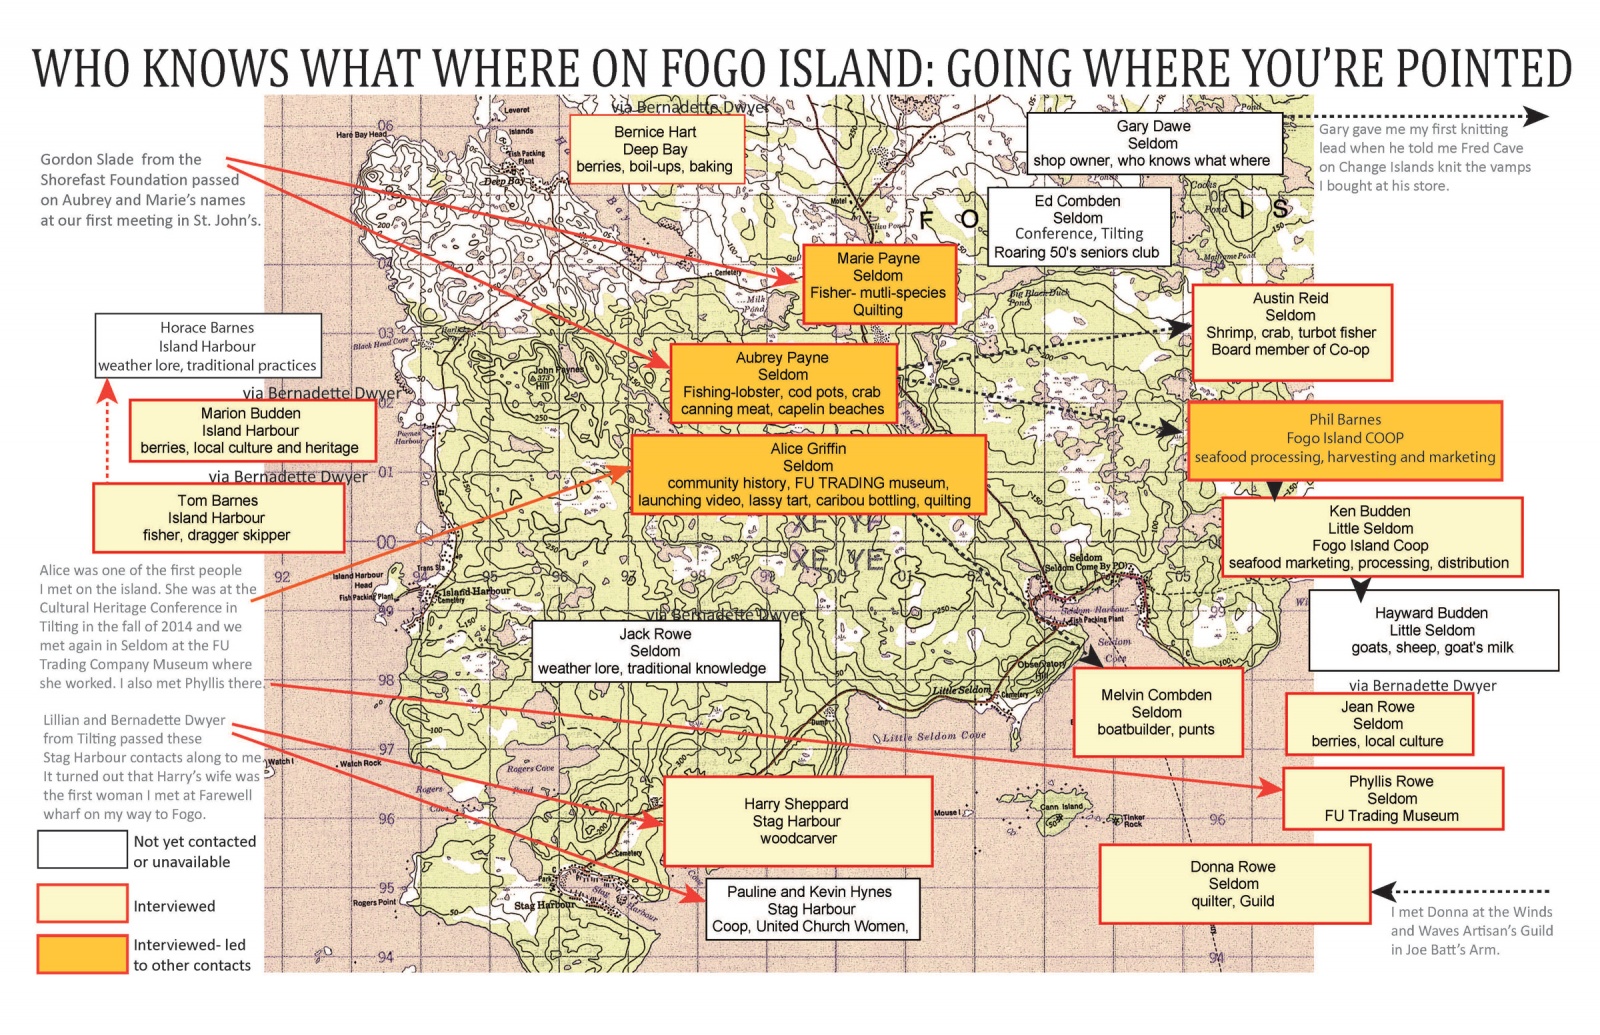 Who Knows What Where on Fogo Island: Going Where You’re Pointed